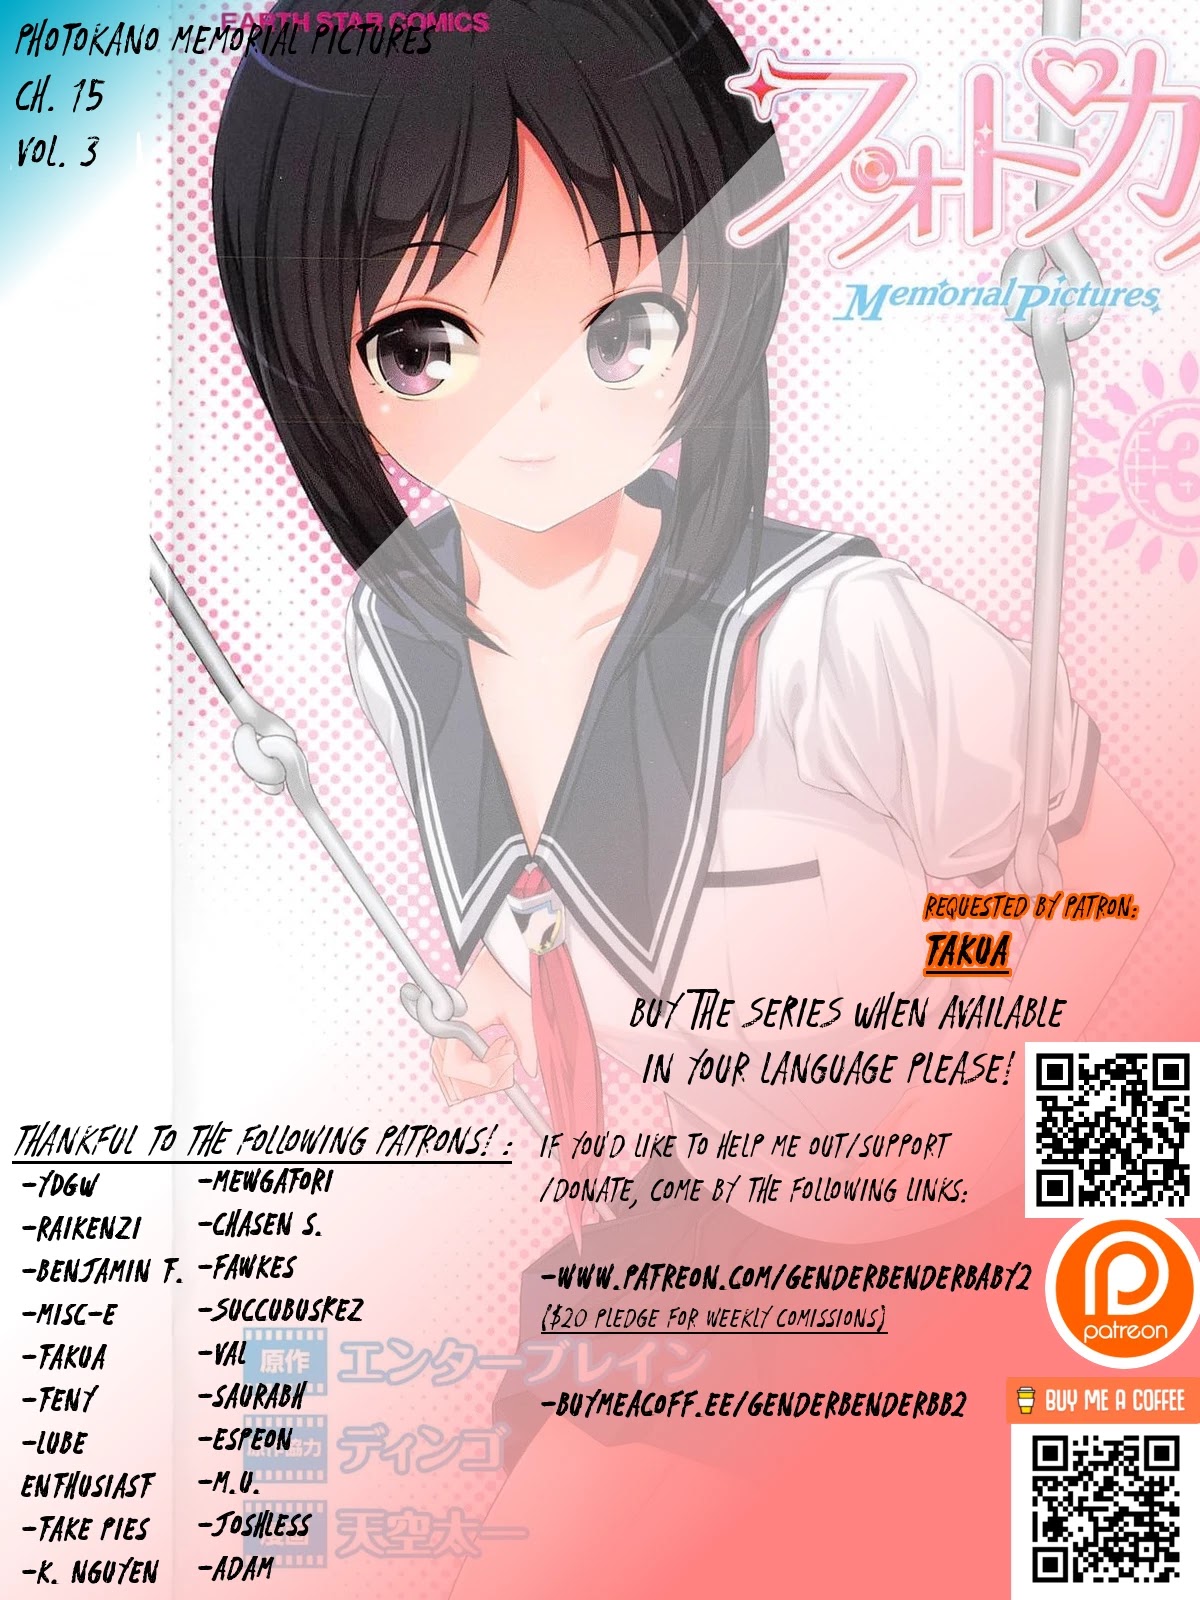 Photo Kano - Memorial Pictures Chapter 15: She Turned Cuter... - Picture 2